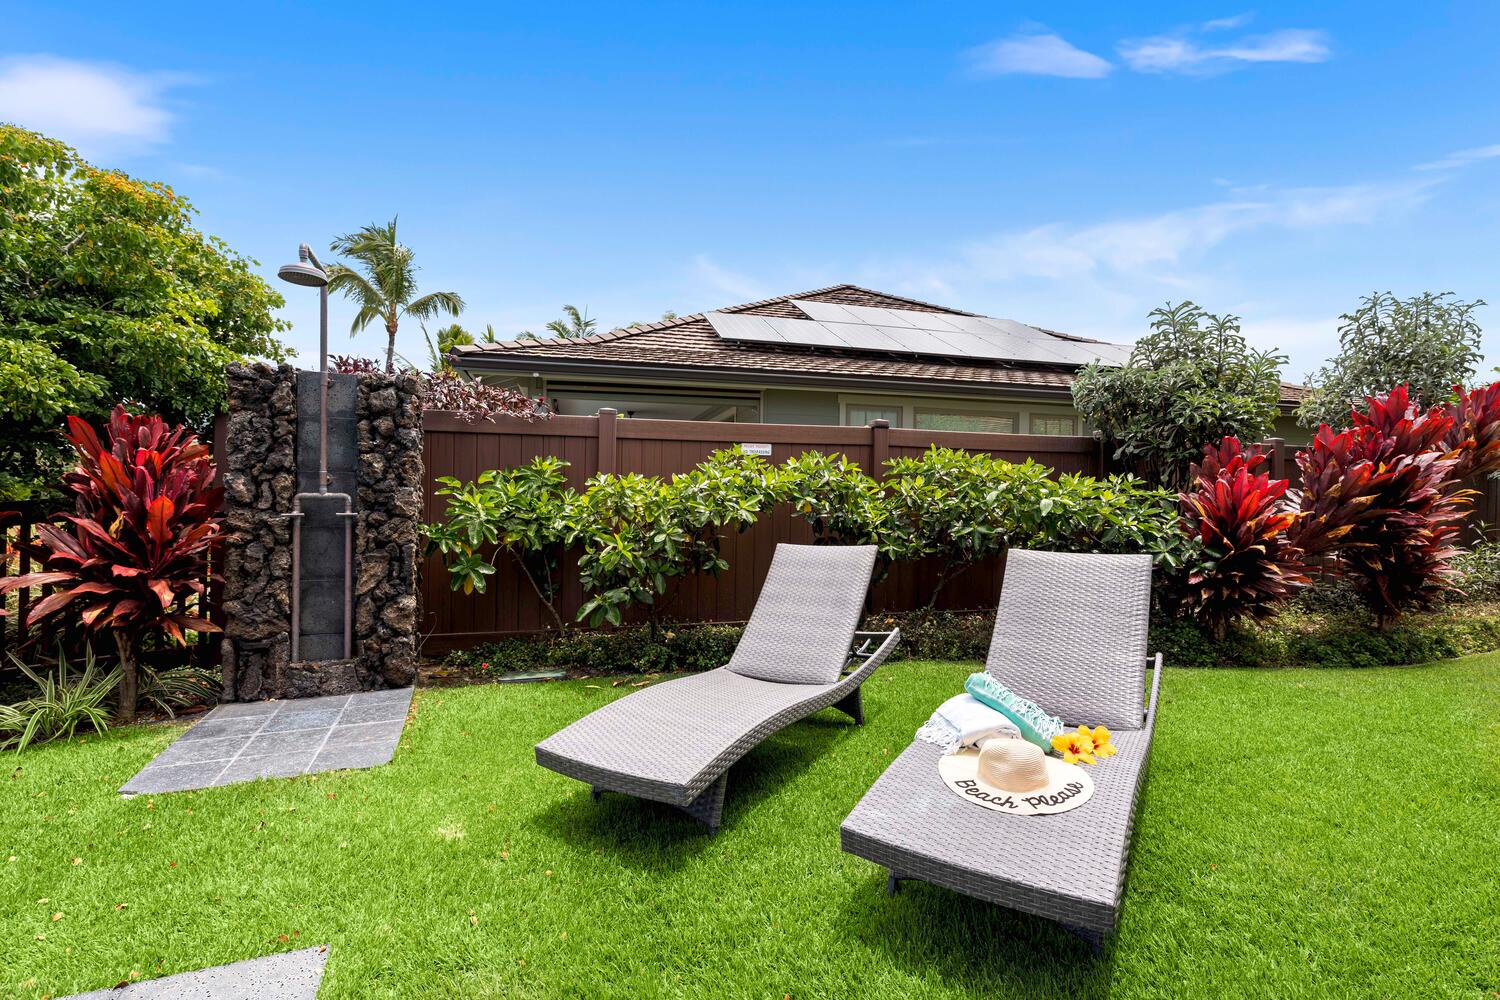 Kailua-Kona Vacation Rentals, Holua Kai #26 - Sunny garden retreat with comfortable loungers, perfect for a relaxing day outdoors.